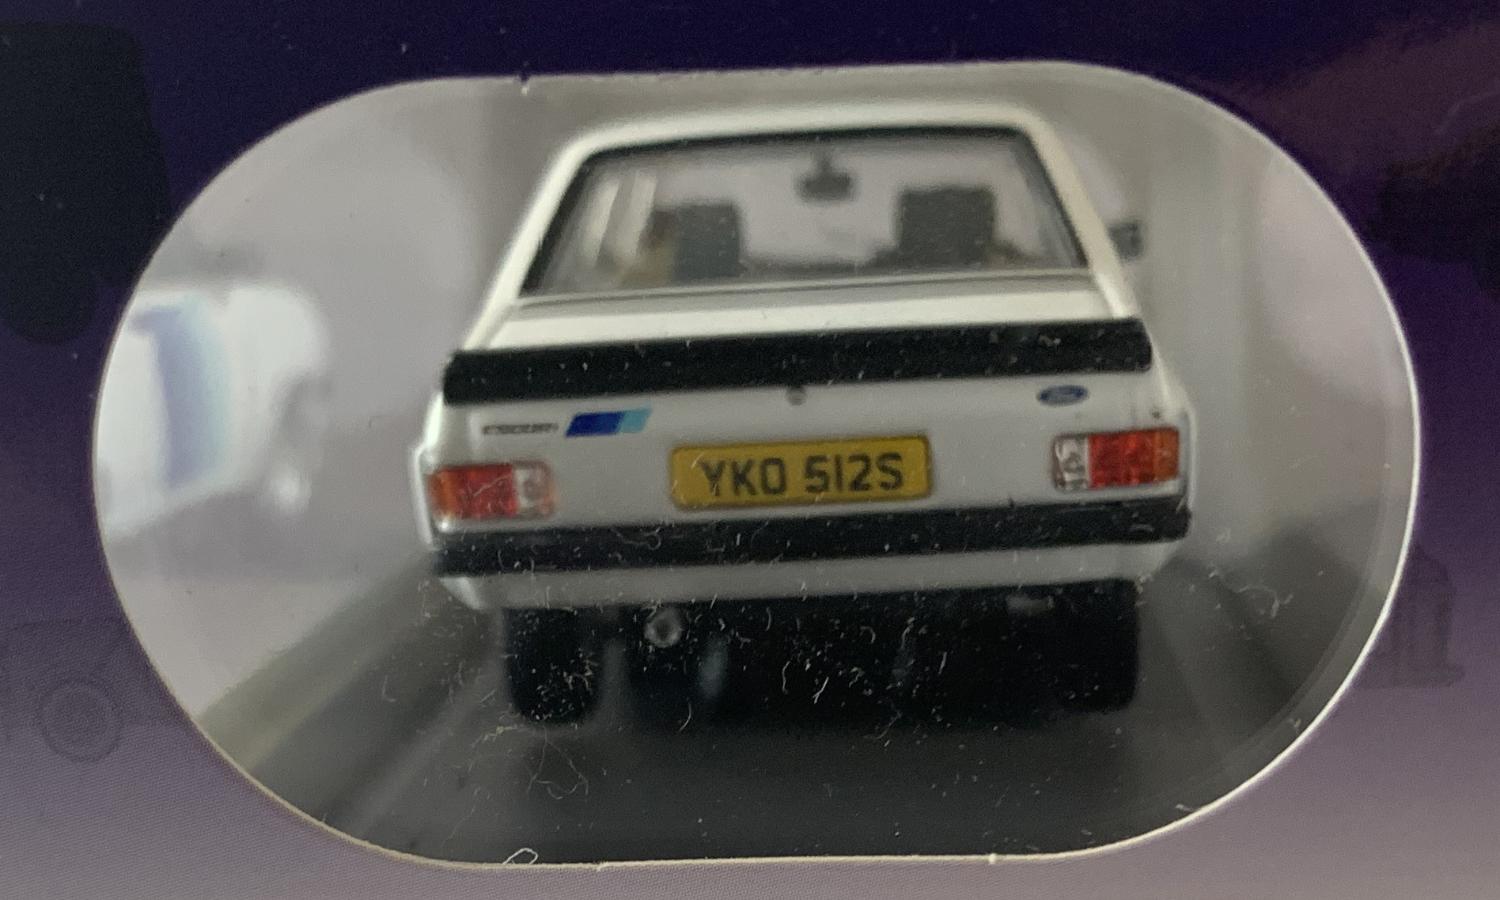 Ford Escort mk 2 RS2000 Series X in diamond white 1:43 scale model from Corgi  Vanguards, Limited Edition model